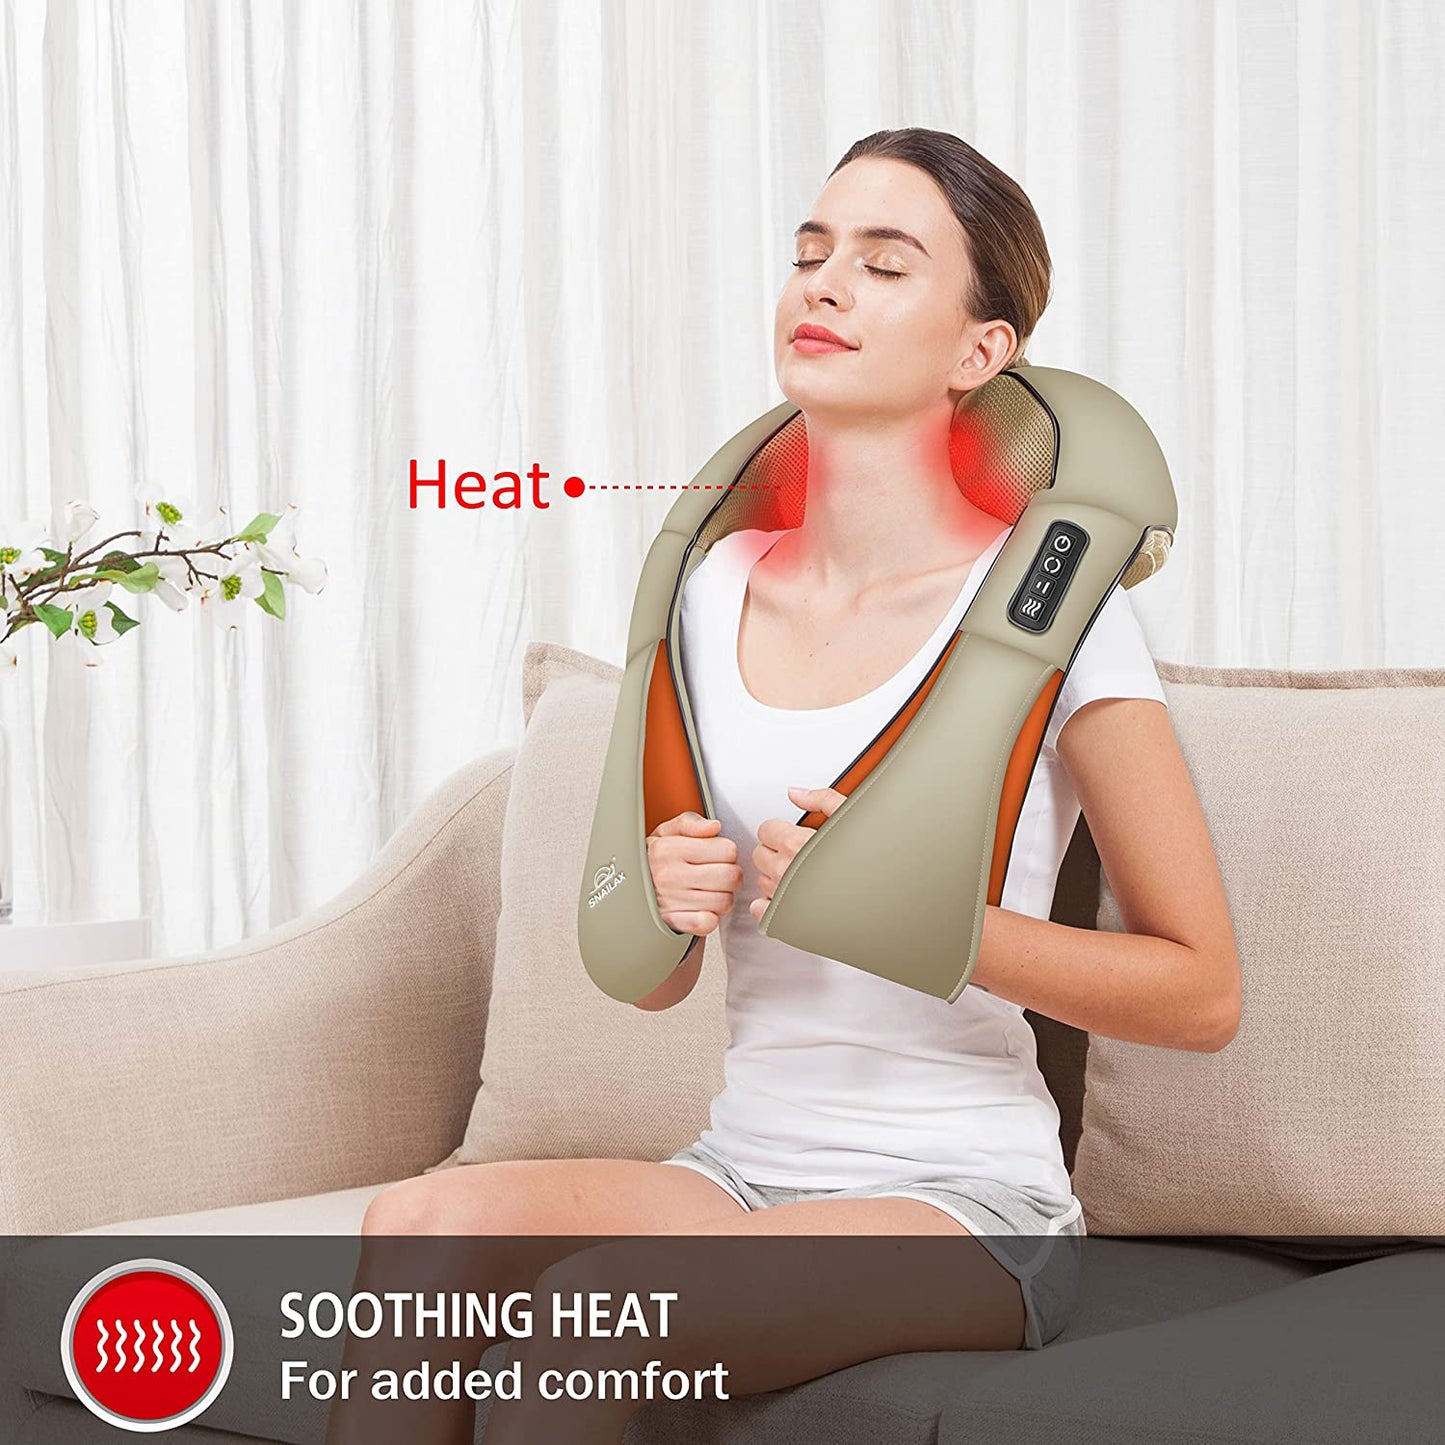 A woman is sitting on a lounge with a cordless neck massager around her shoulders.